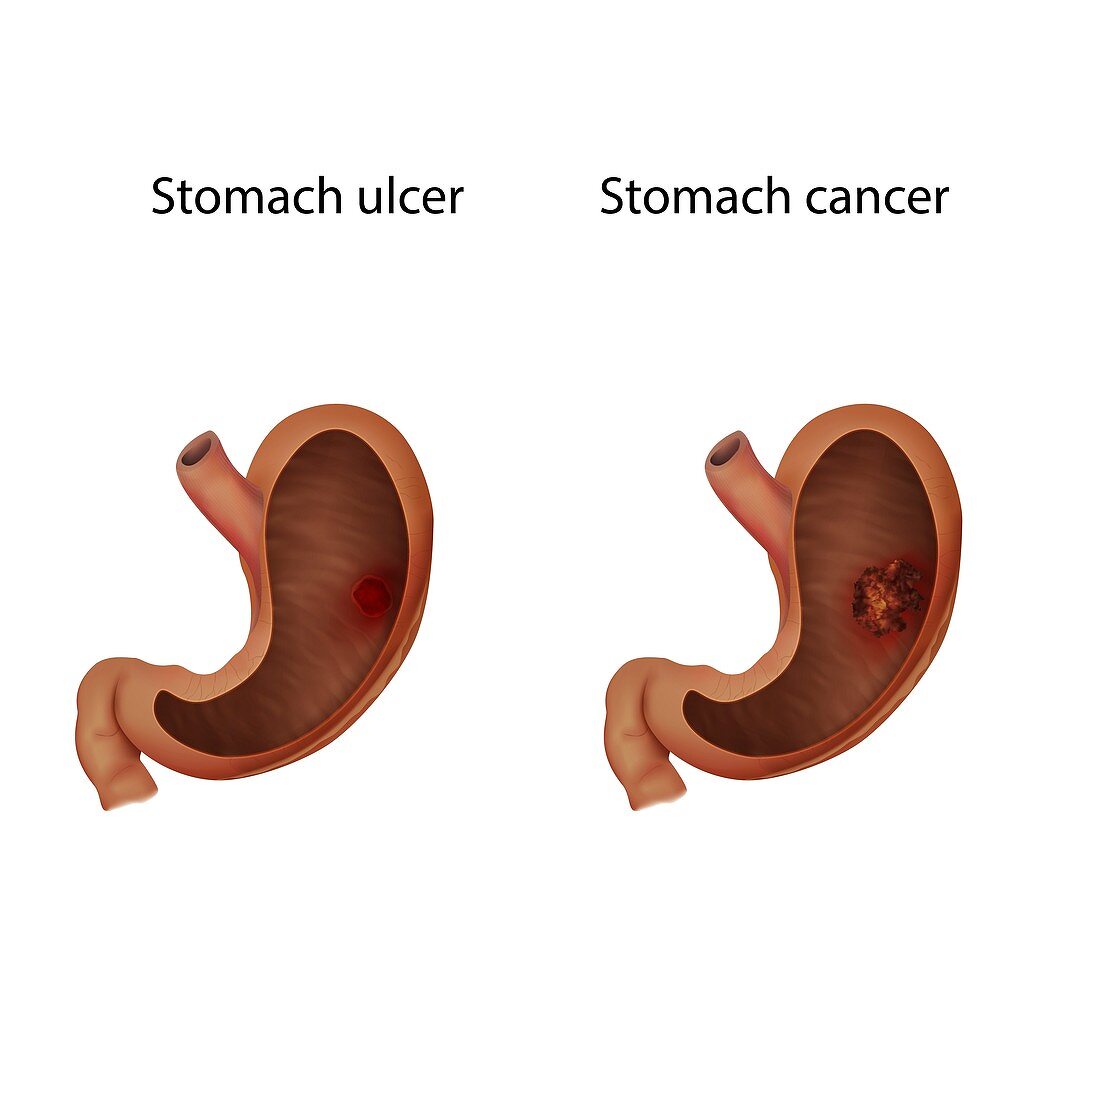 Stomach ulcer and stomach cancer, illustration